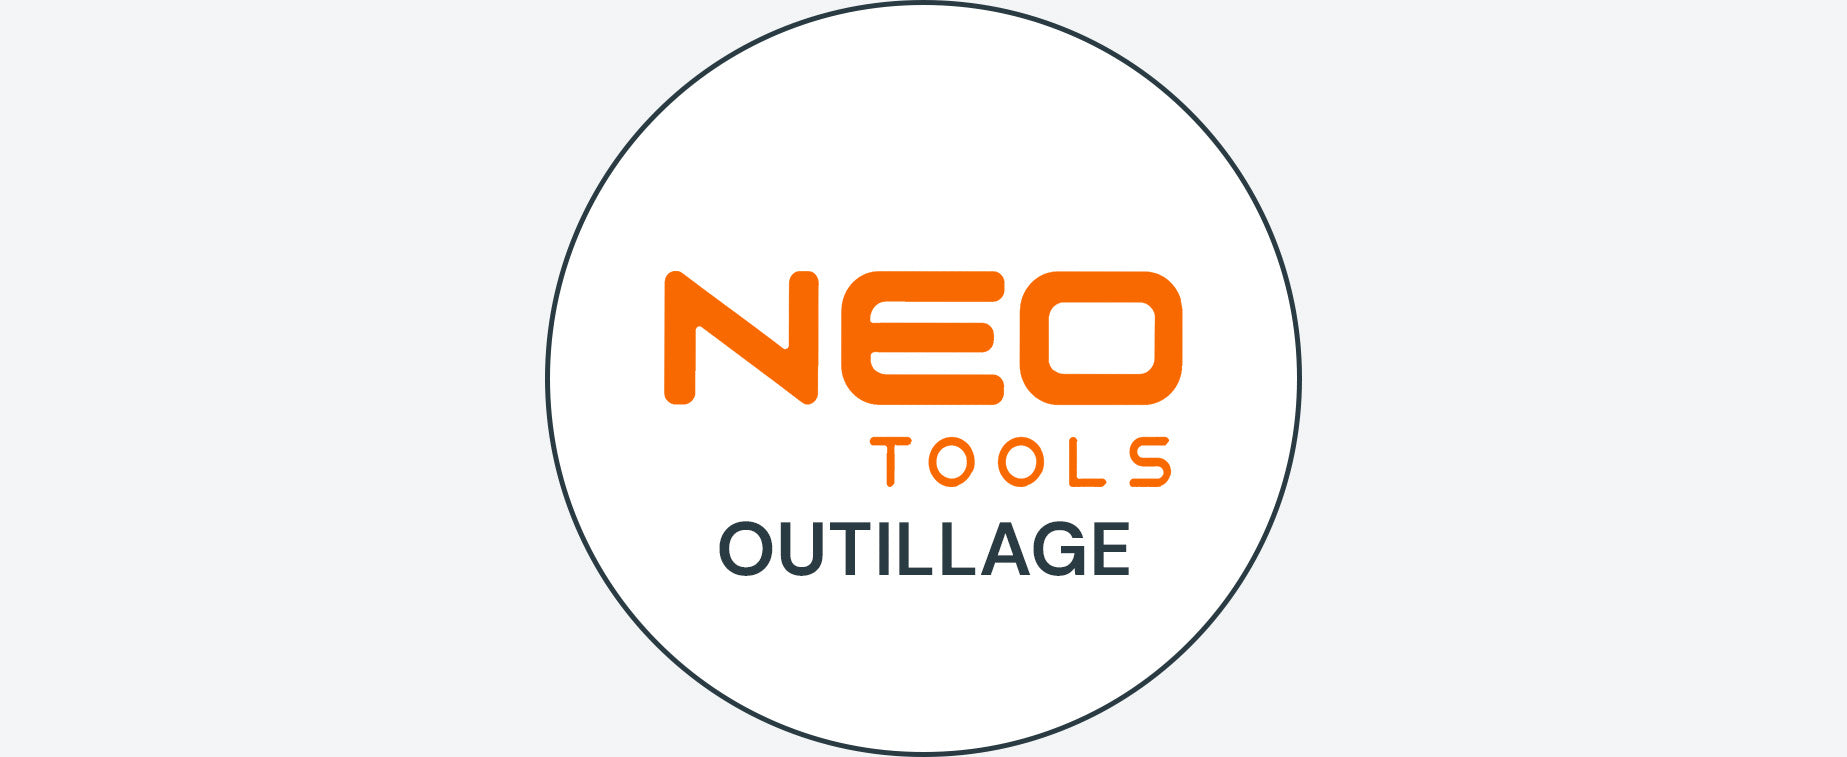 NEO TOOLS OUTILLAGE